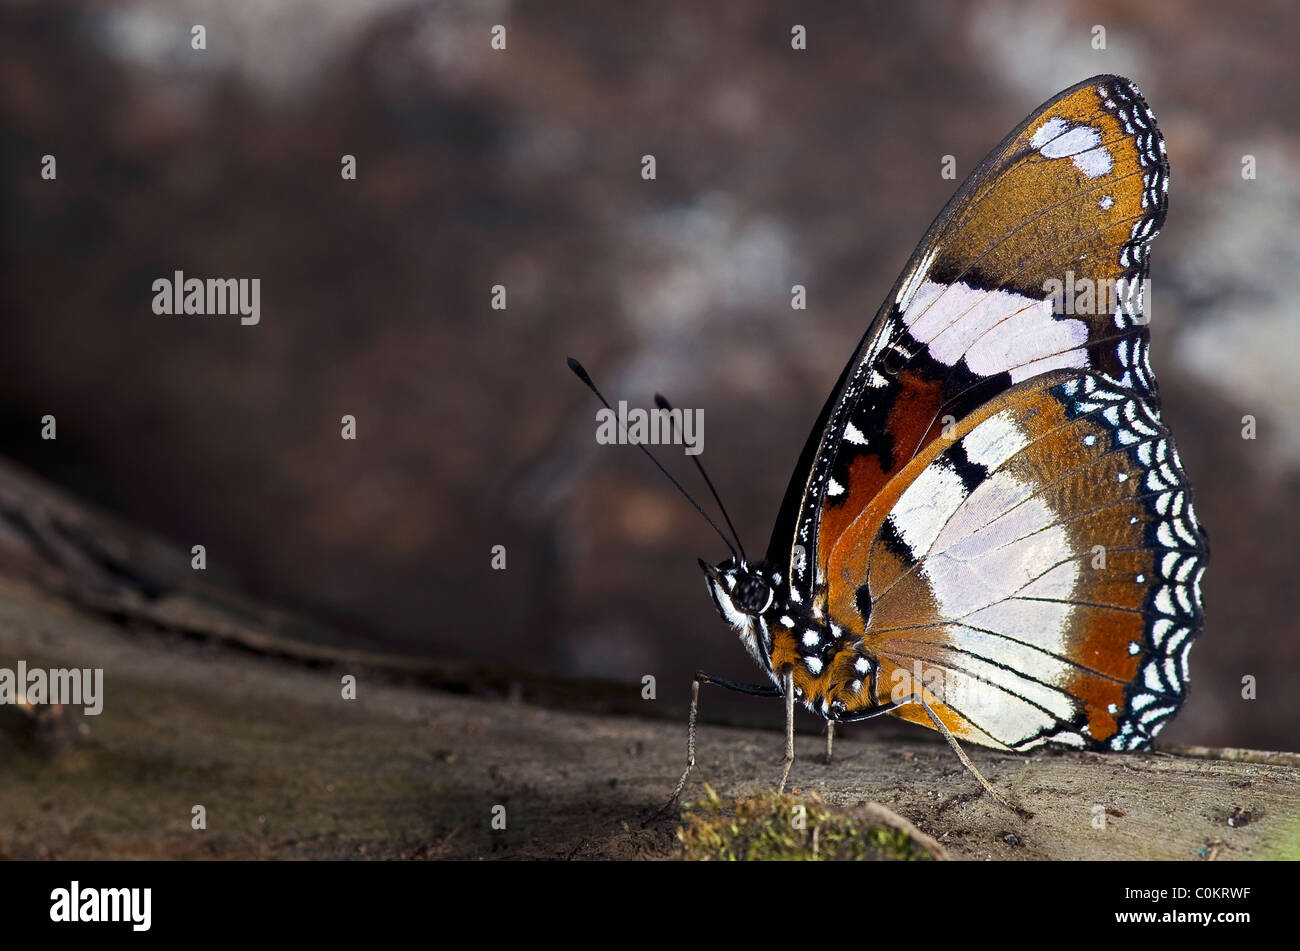 A Plain Tiger Butterfly of the Nymphalidae family, found throughout Malaysia, Africa and Australia. Stock Photo